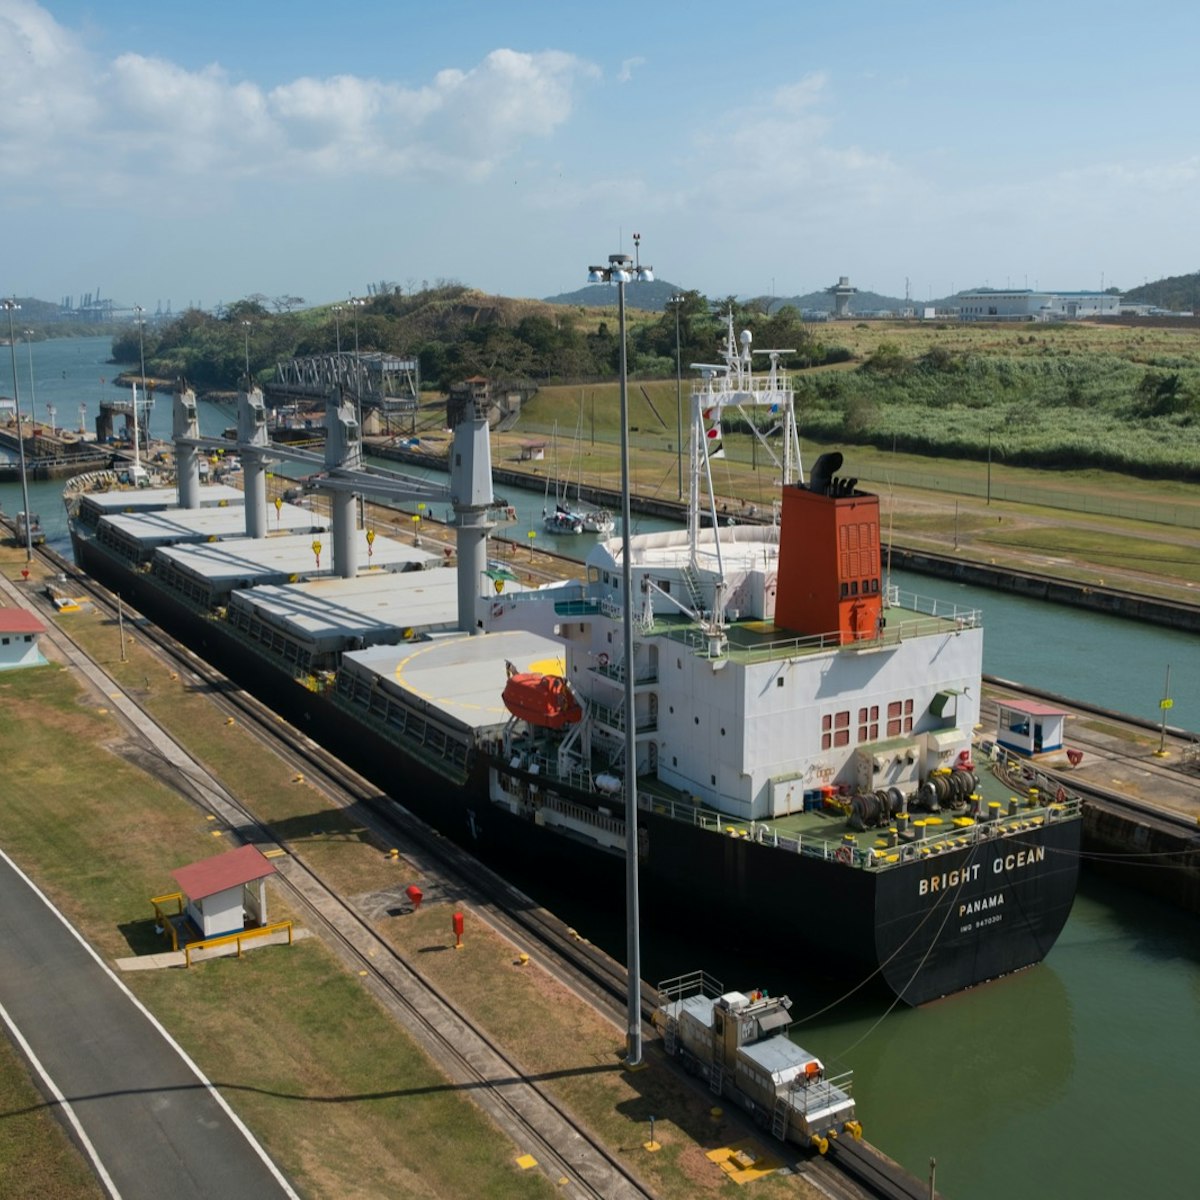 Panama City, Panama - march 2018: Ship crossing the Panama Canal, Miraflores Locks, Panama City; Shutterstock ID 1055607245; Your name (First / Last): Alicia Johnson; GL account no.: 65050; Netsuite department name: Online Editorial ; Full Product or Project name including edition: Panama